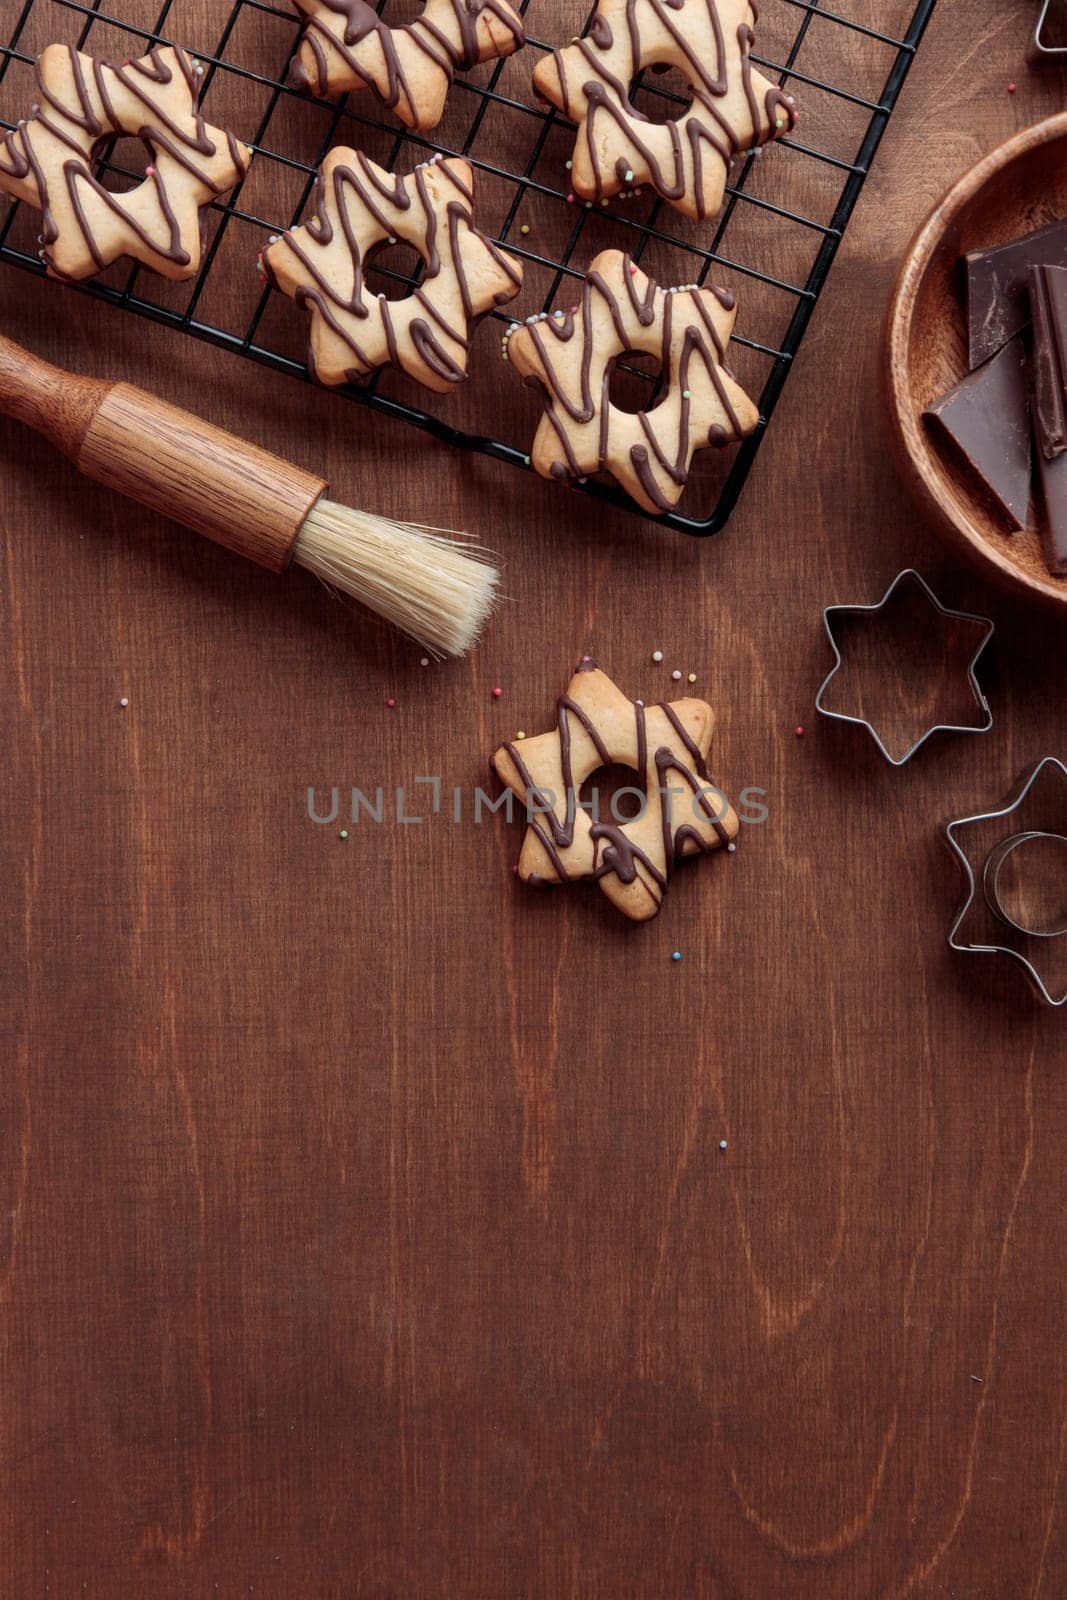 Freshly baked homemade star-shaped cookie with chocolate on the grid on the wooden table with a copy space, vertical